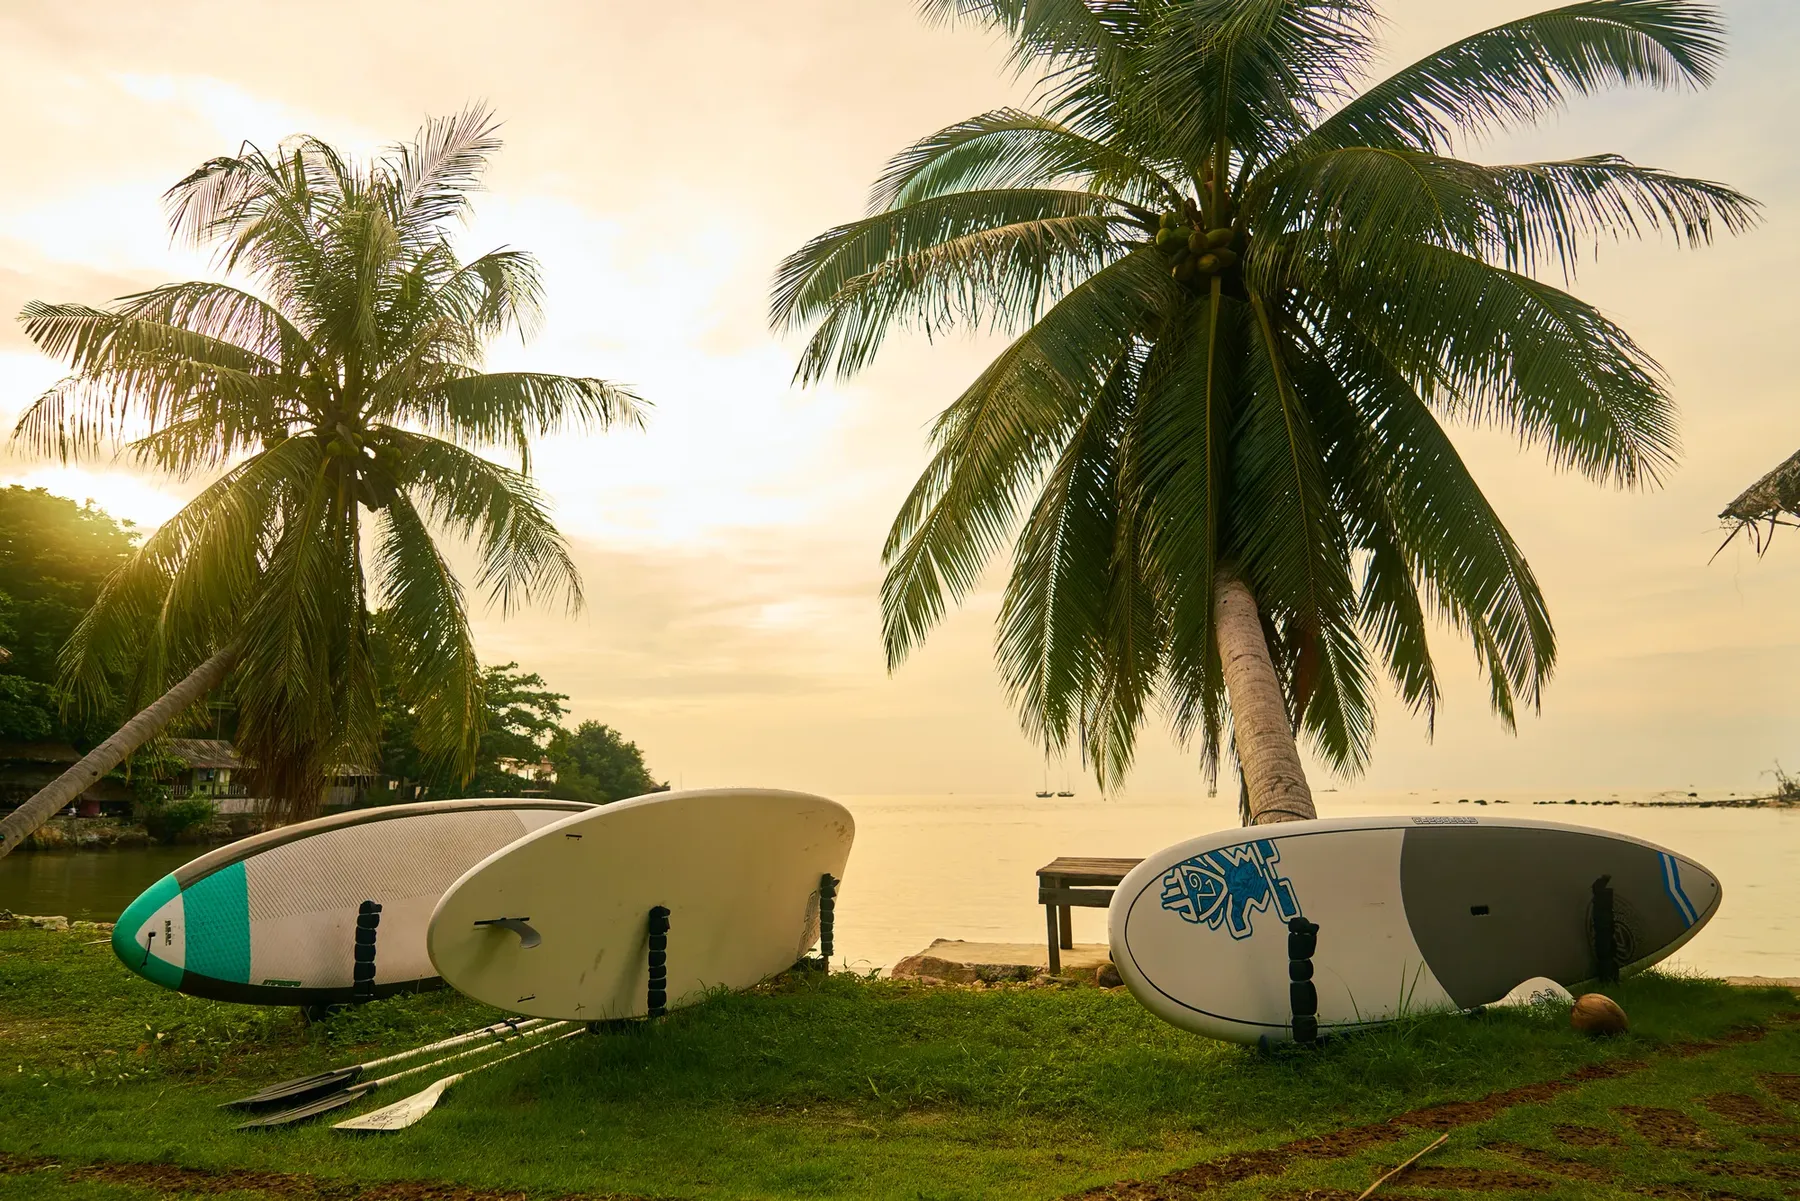 Three surfboards and paddles set against palm trees and calm waters somewhere in Thailand.